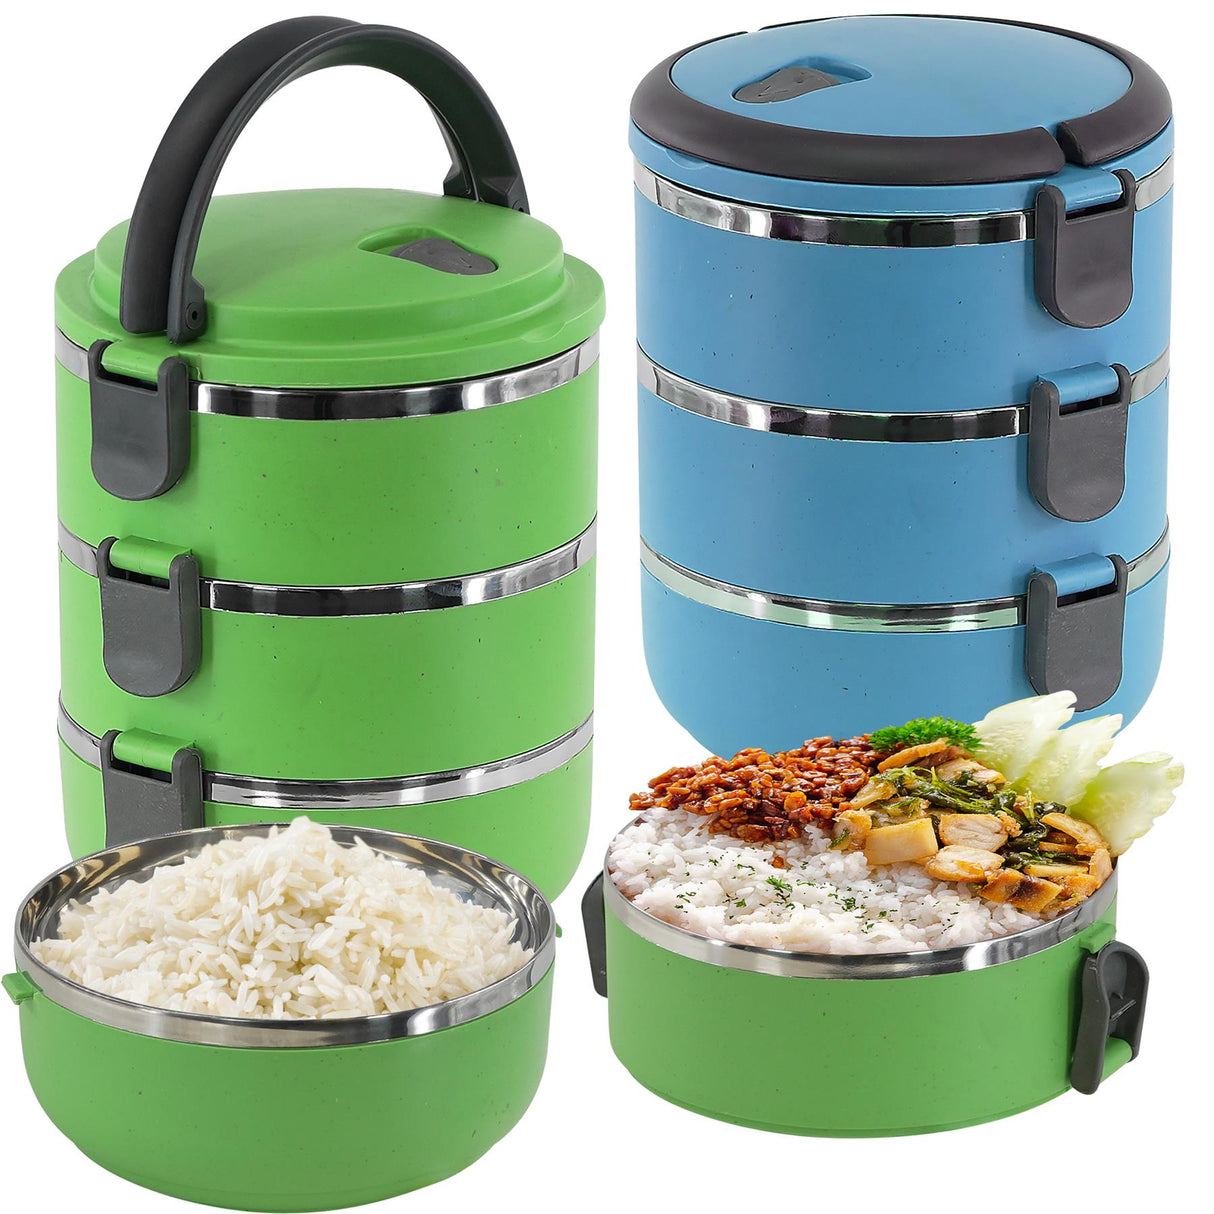 3 Layer Tier Lunch Box by Geezy - UKBuyZone